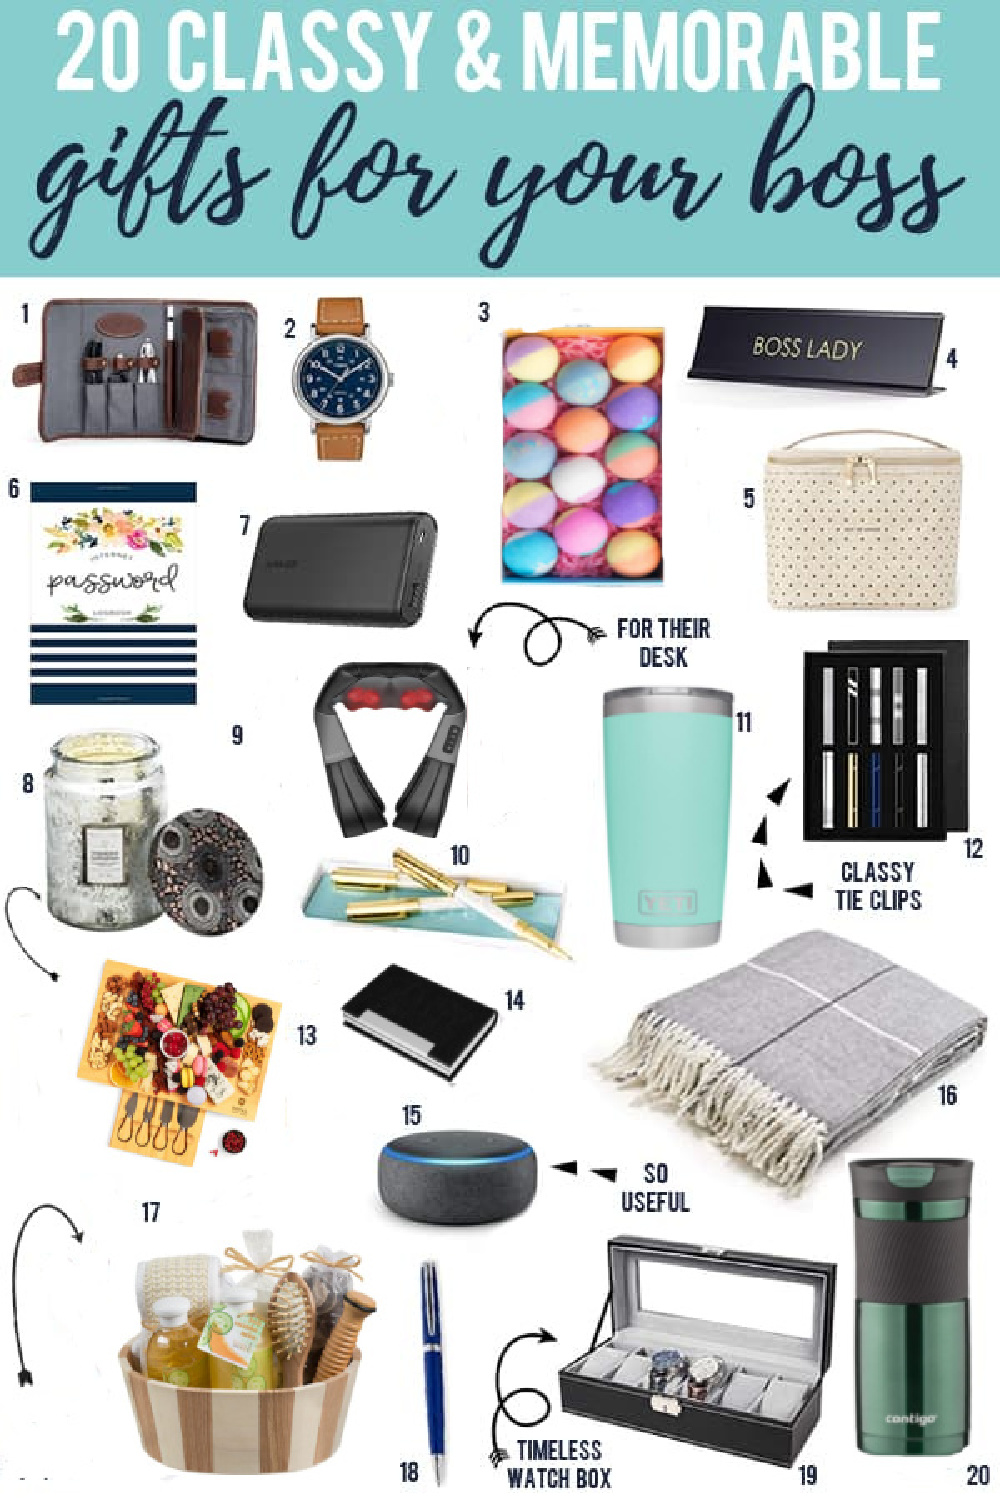 20 Classy White Elephant gifts for your boss with images below of the gifts.